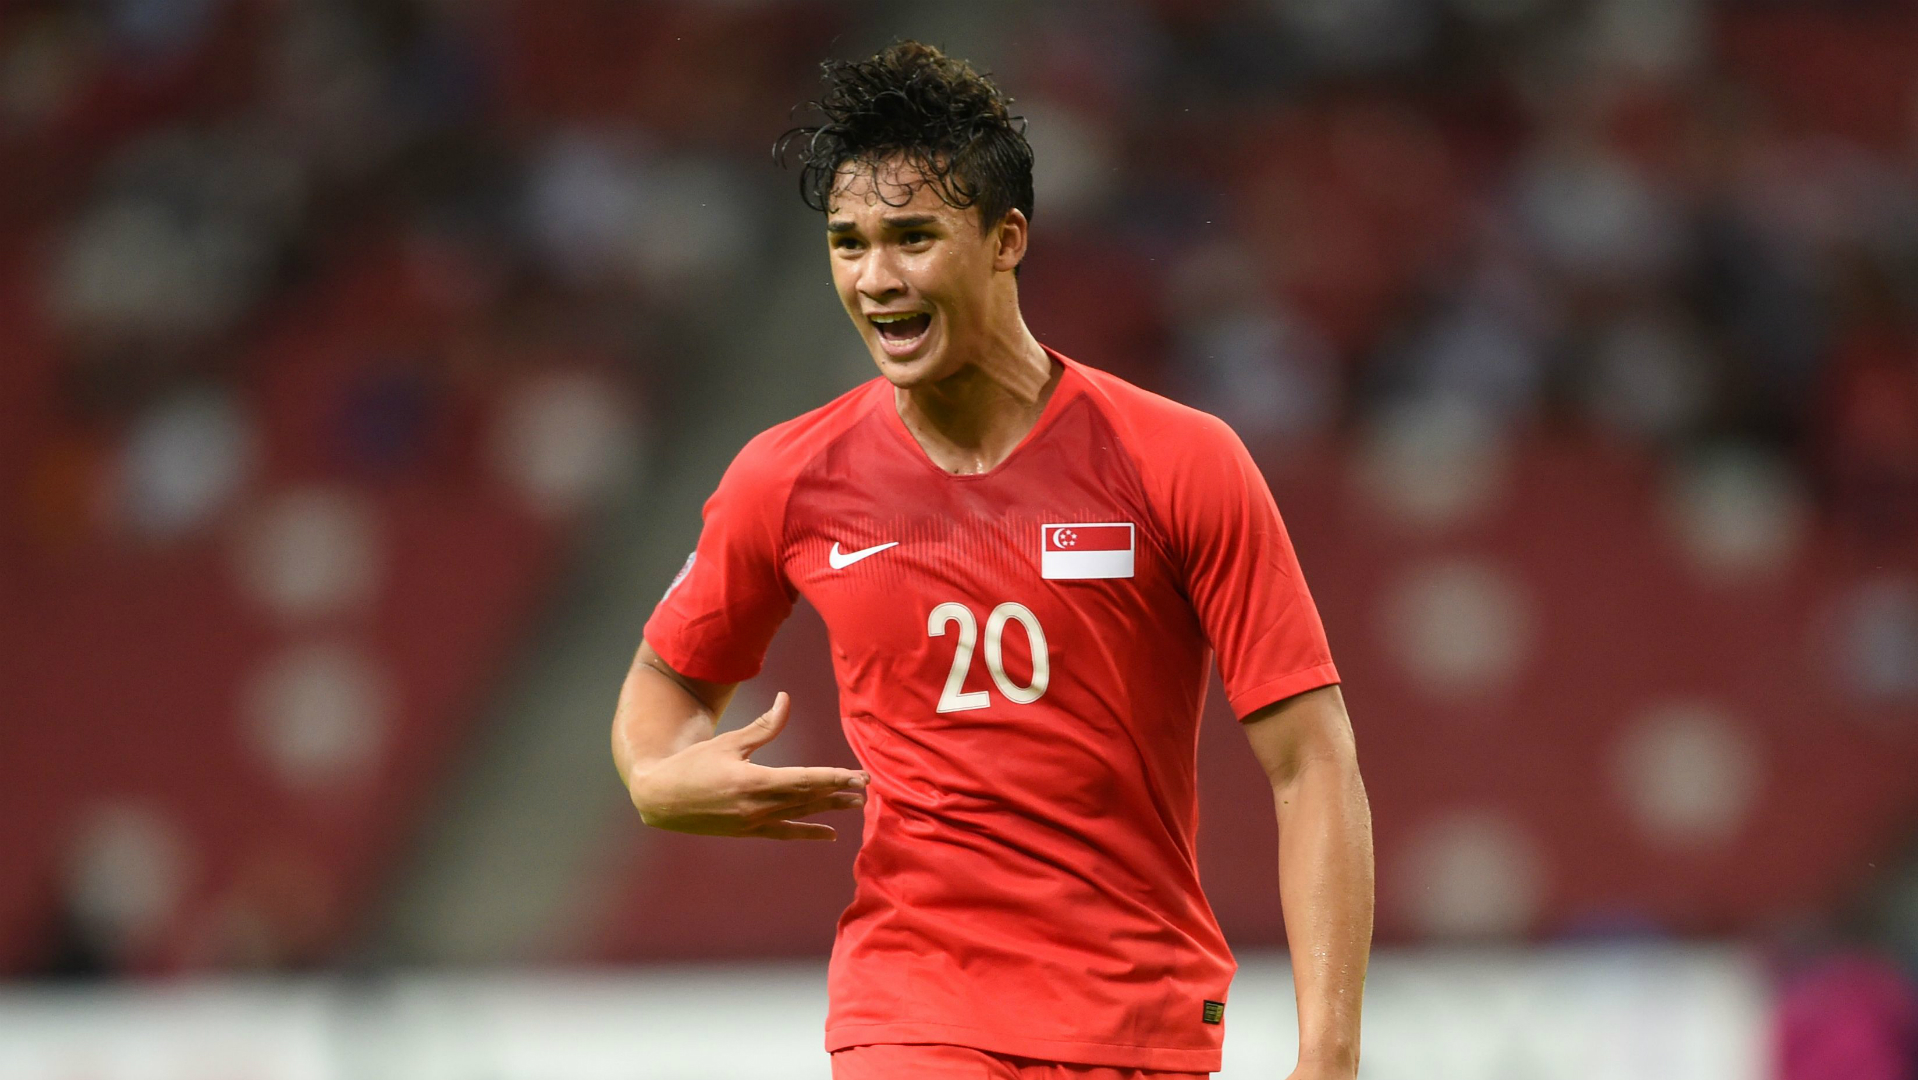 AFF Suzuki Cup: Singapore squad, fixtures, results, table, TV schedule and online streams